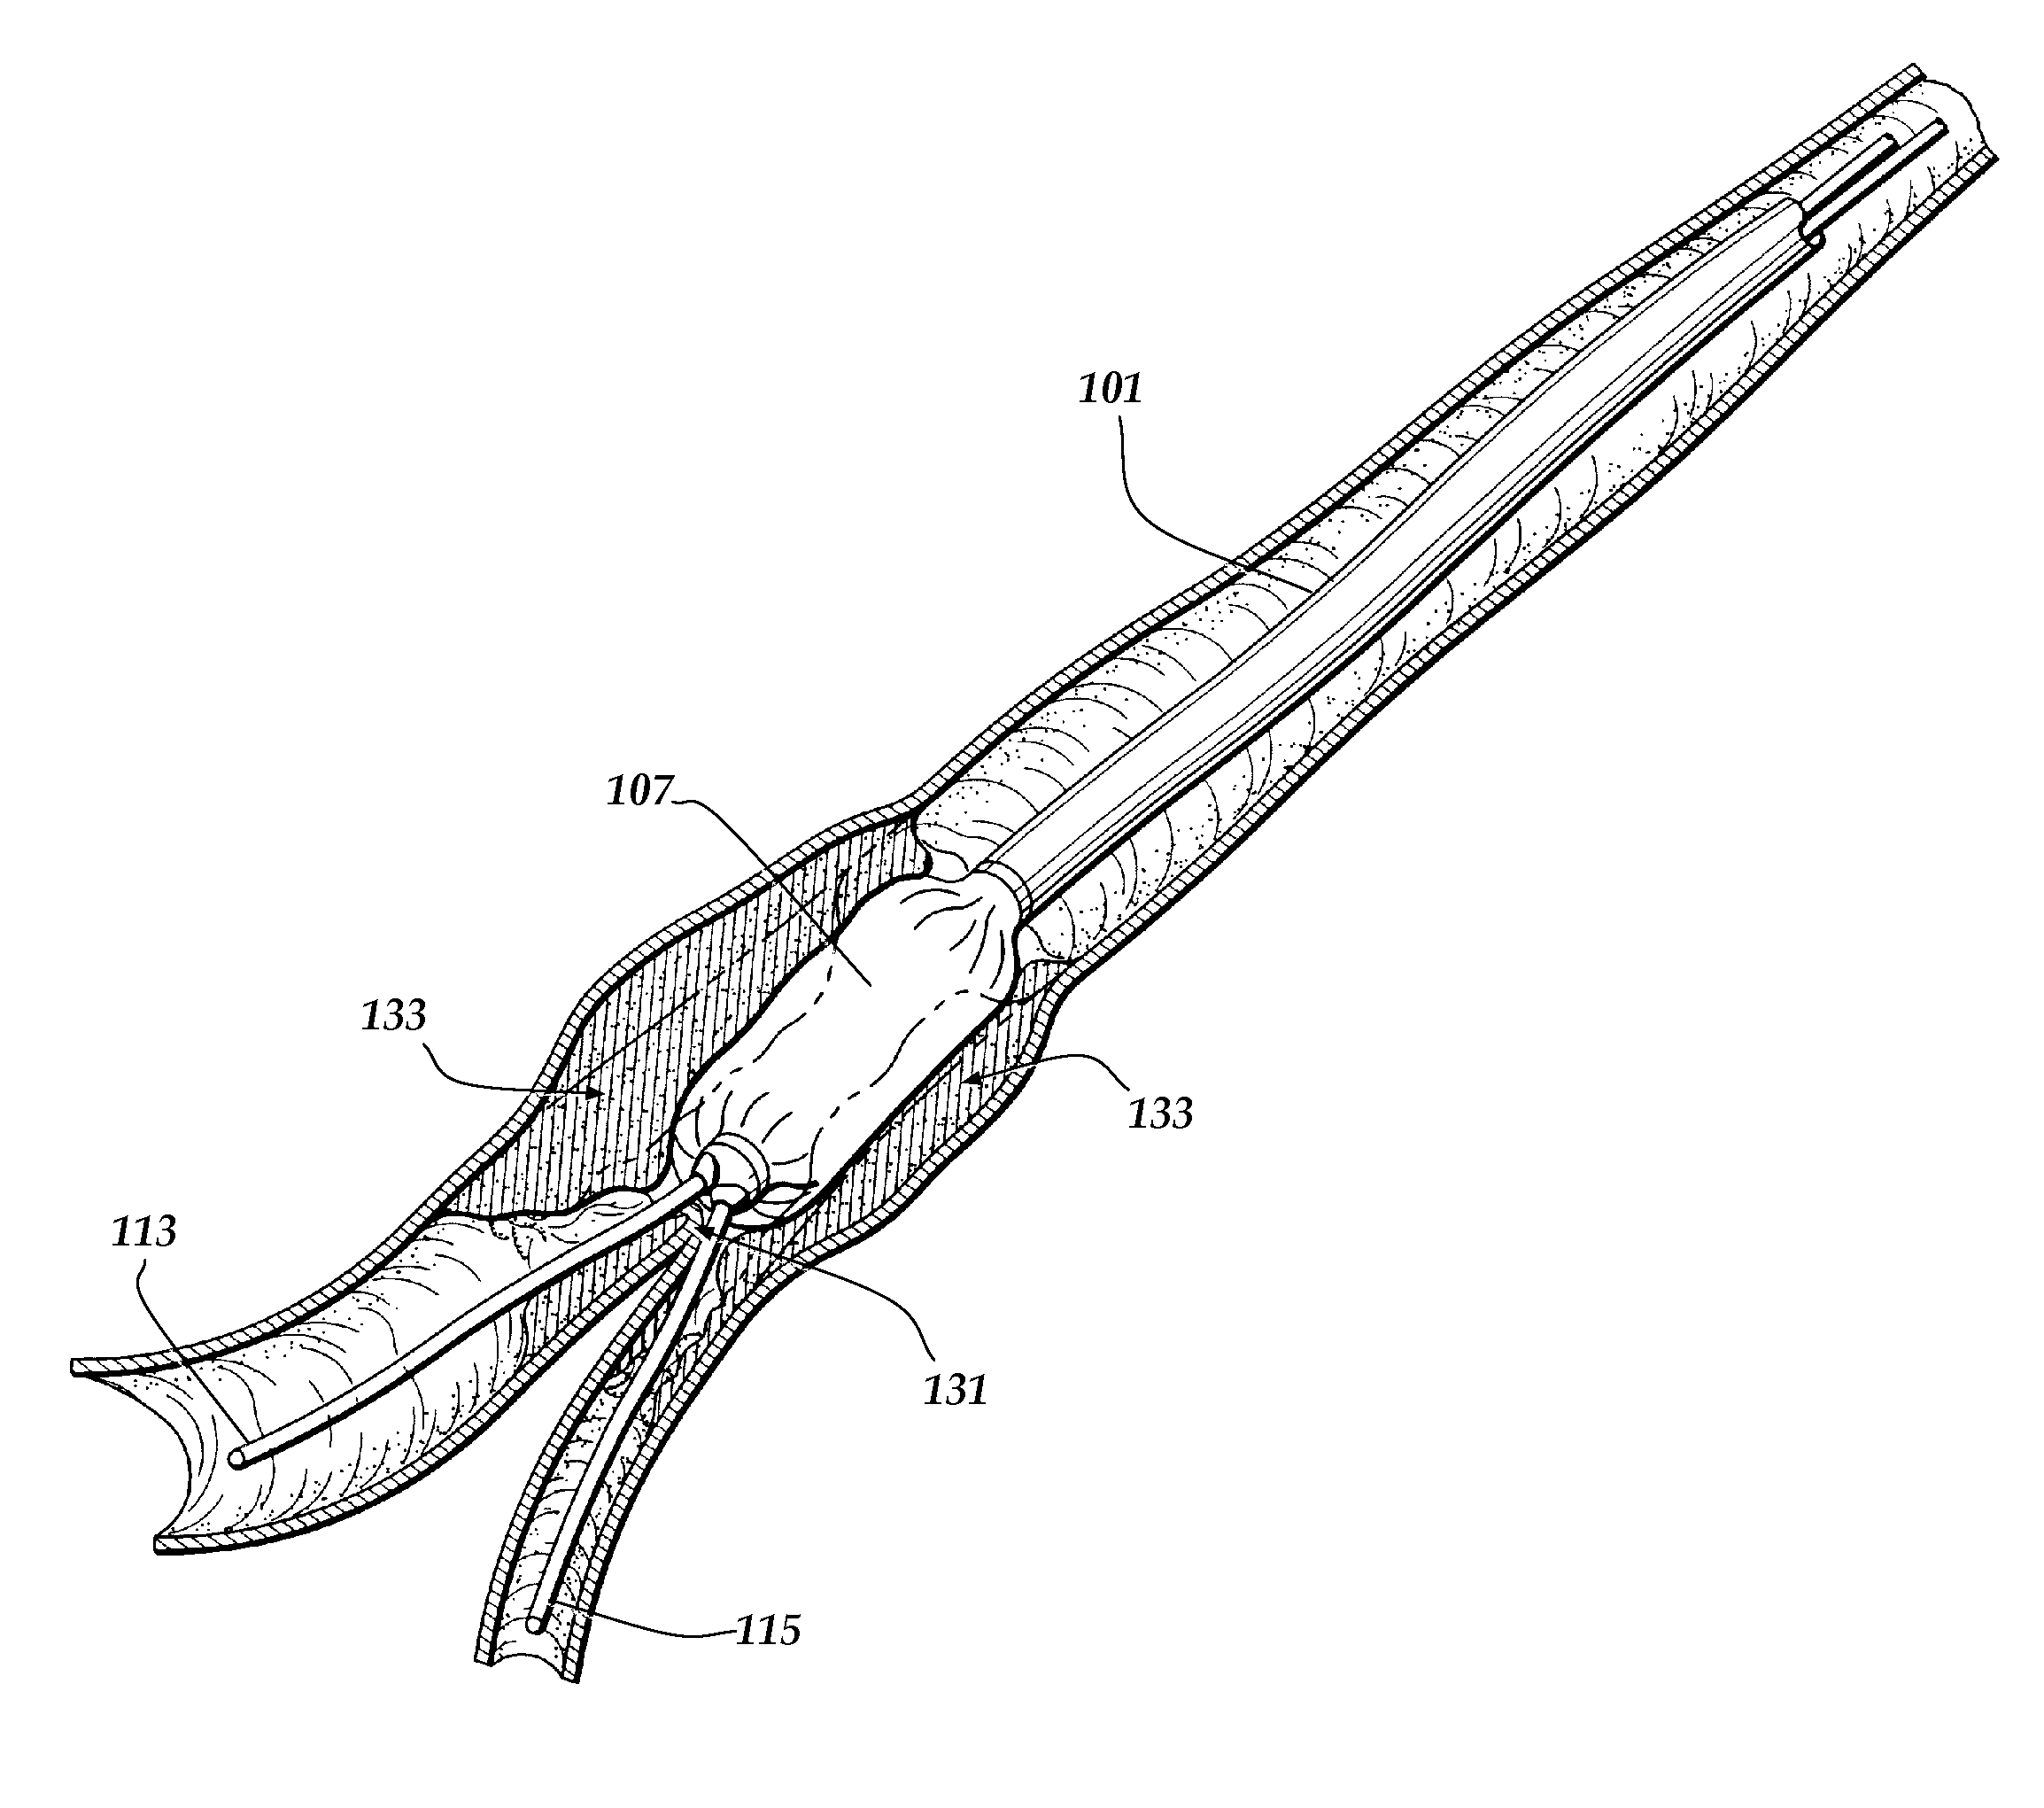 Apparatus and method for treatment of bifurcation lesions